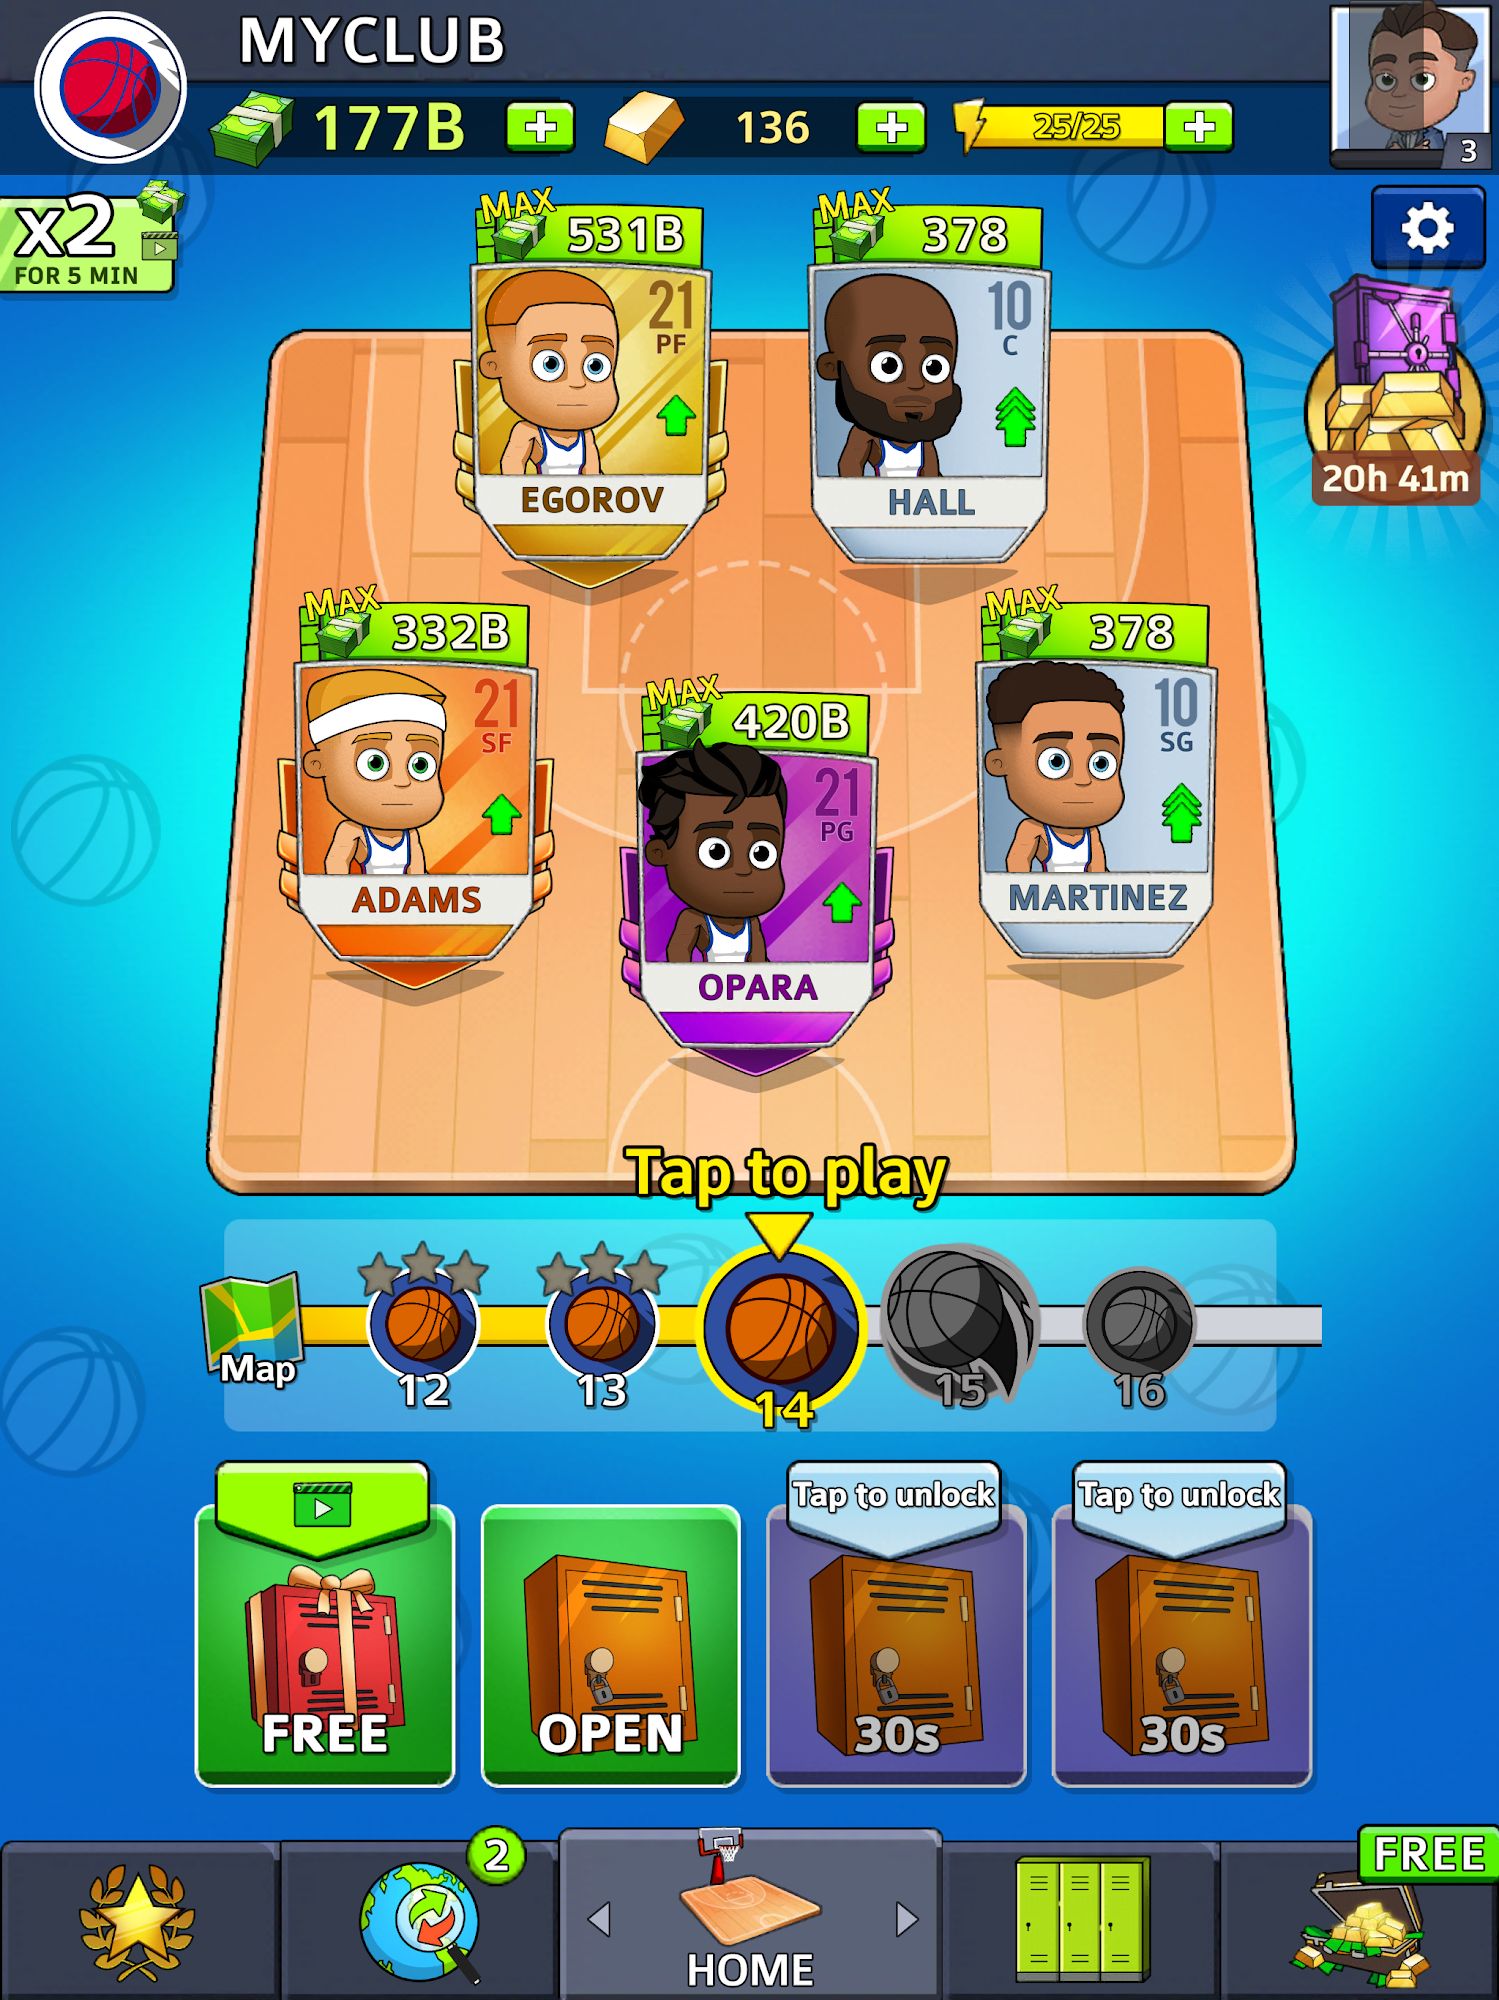 Download Idle Five - Be a millionaire basketball tycoon für Android kostenlos.